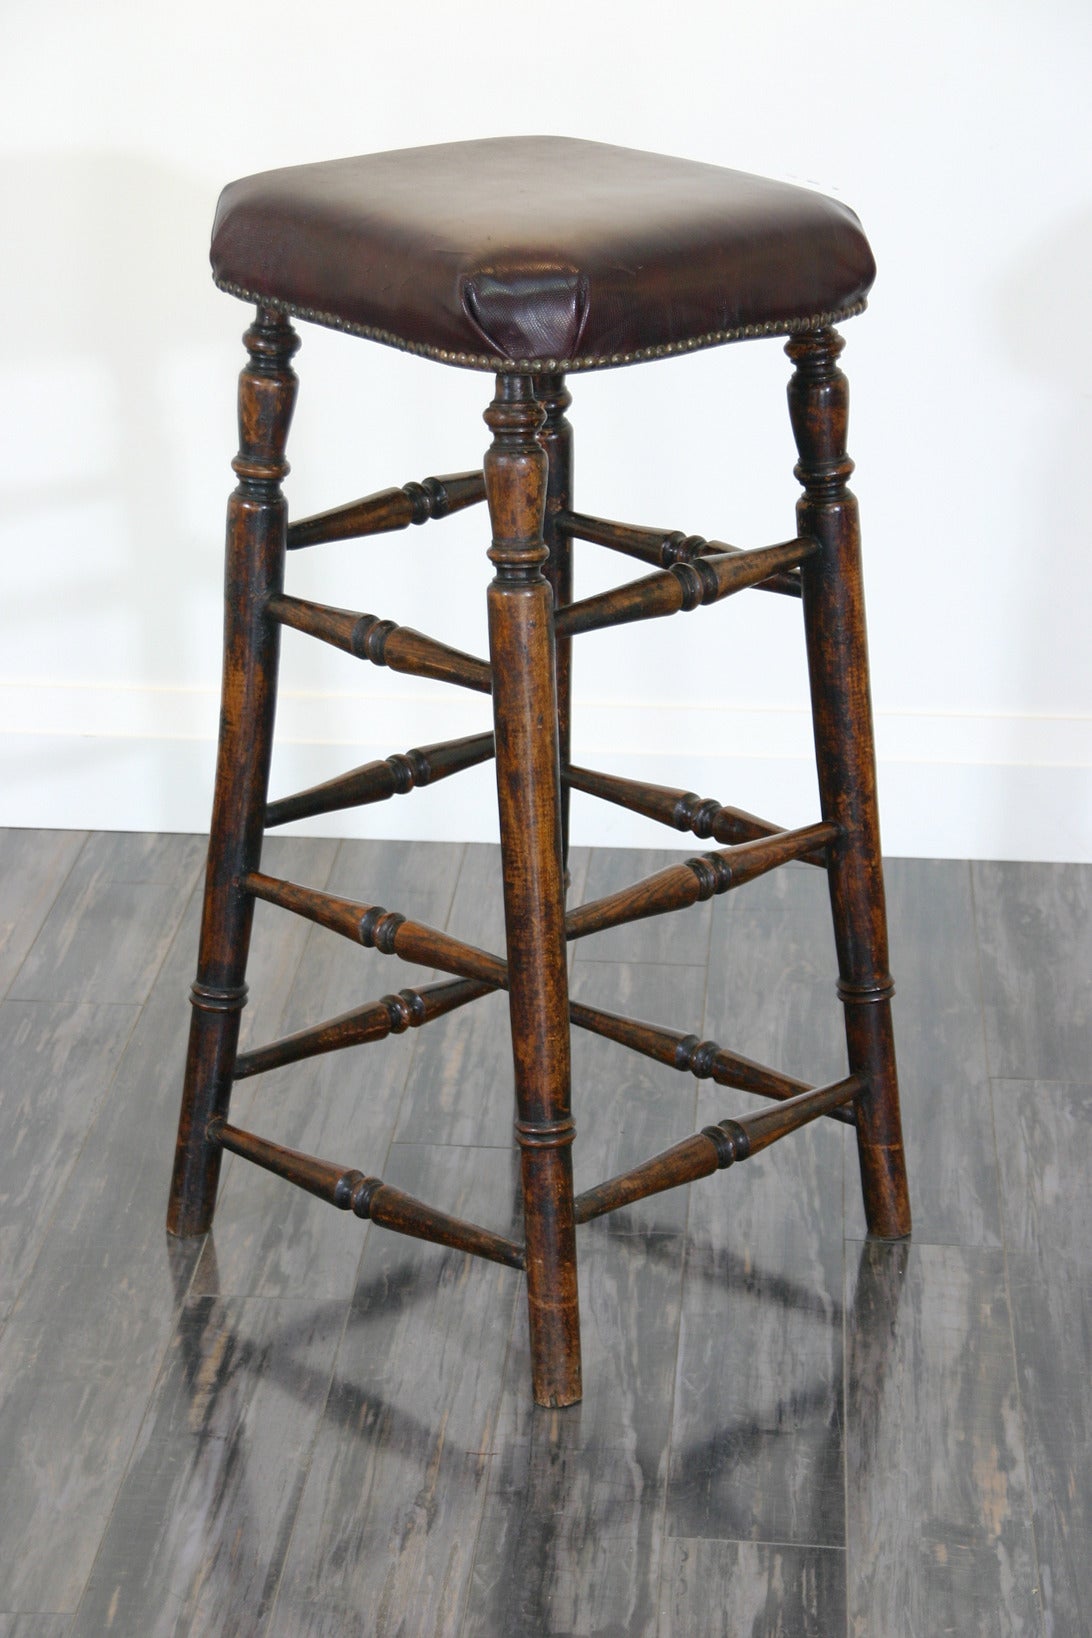 An English late 19th century oak counter stool with leather nailed upholstery.